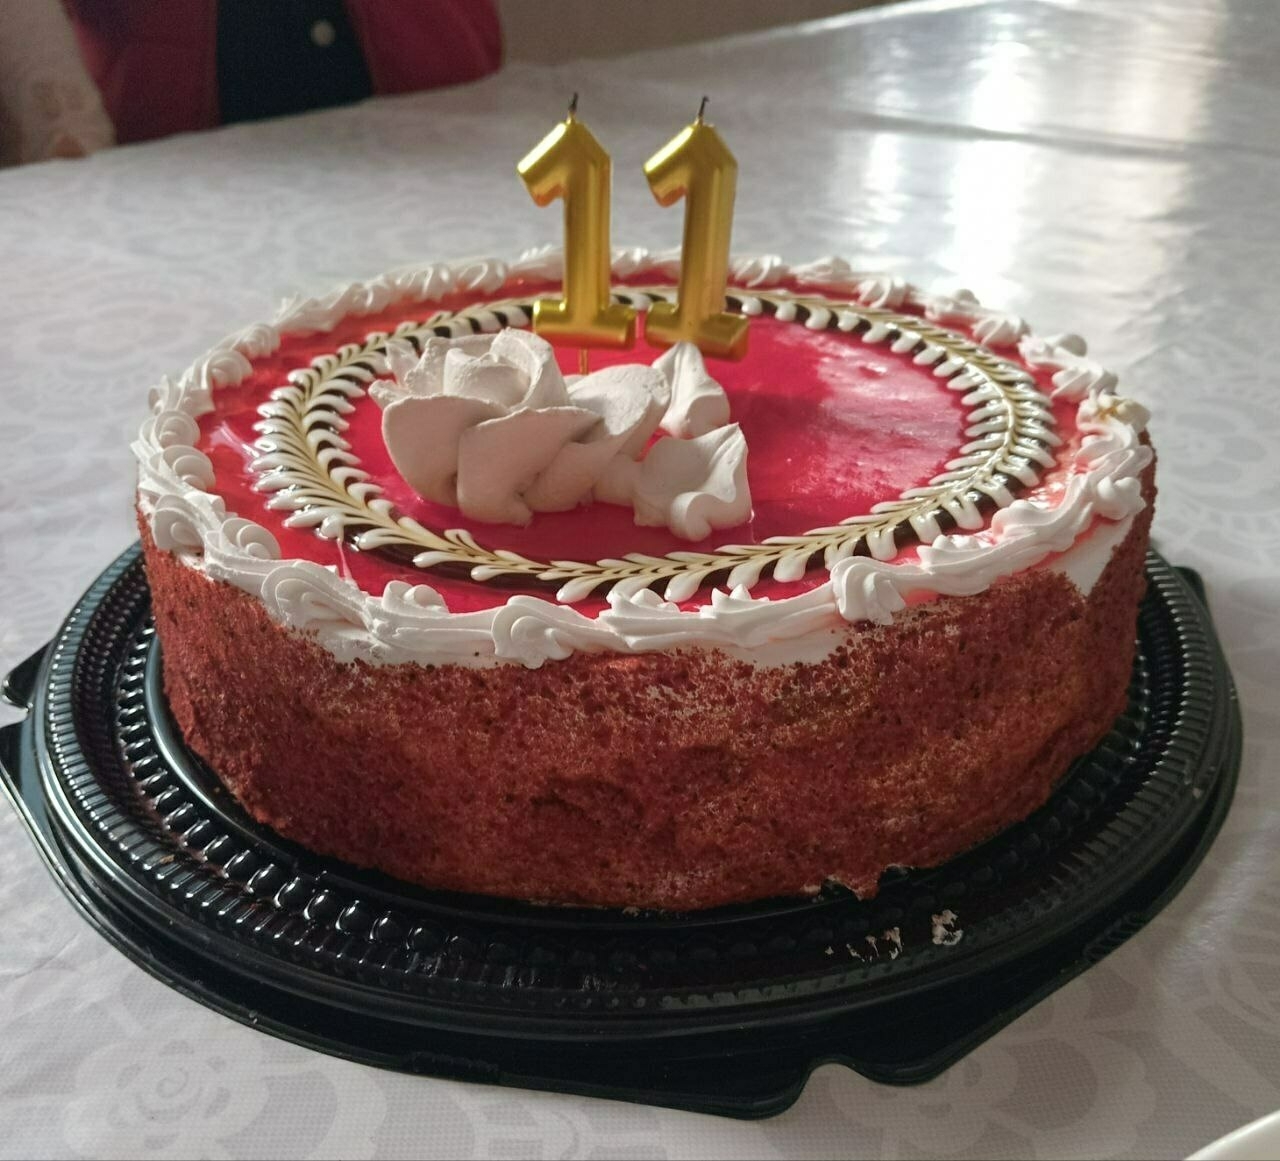 decorated red and white cake on a plastic, black platter with two gold 1 candles on top